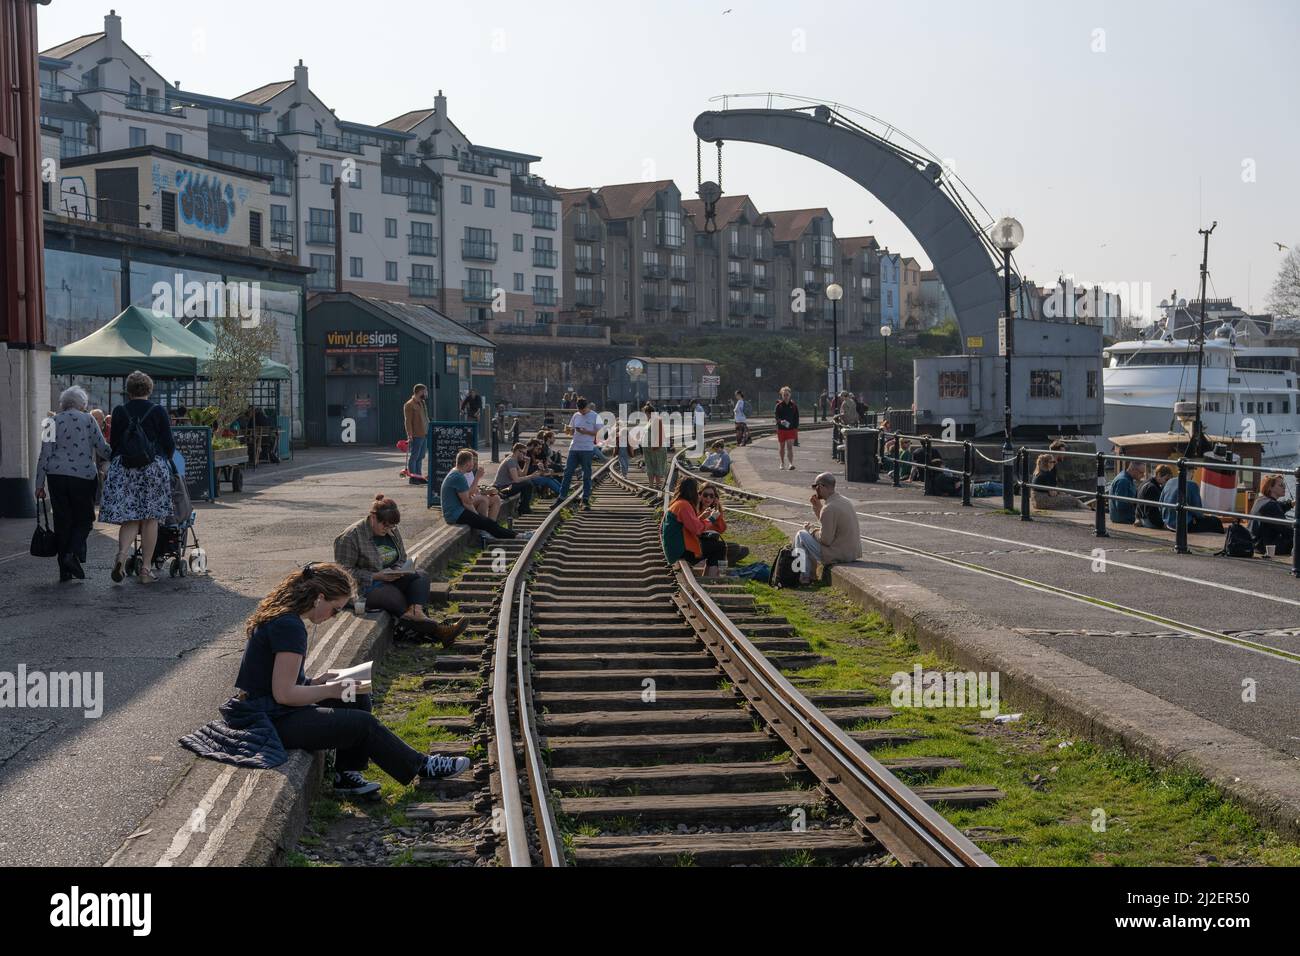 People spending leisure time at the harbour on a sunny day. Bristol, UK. Stock Photo